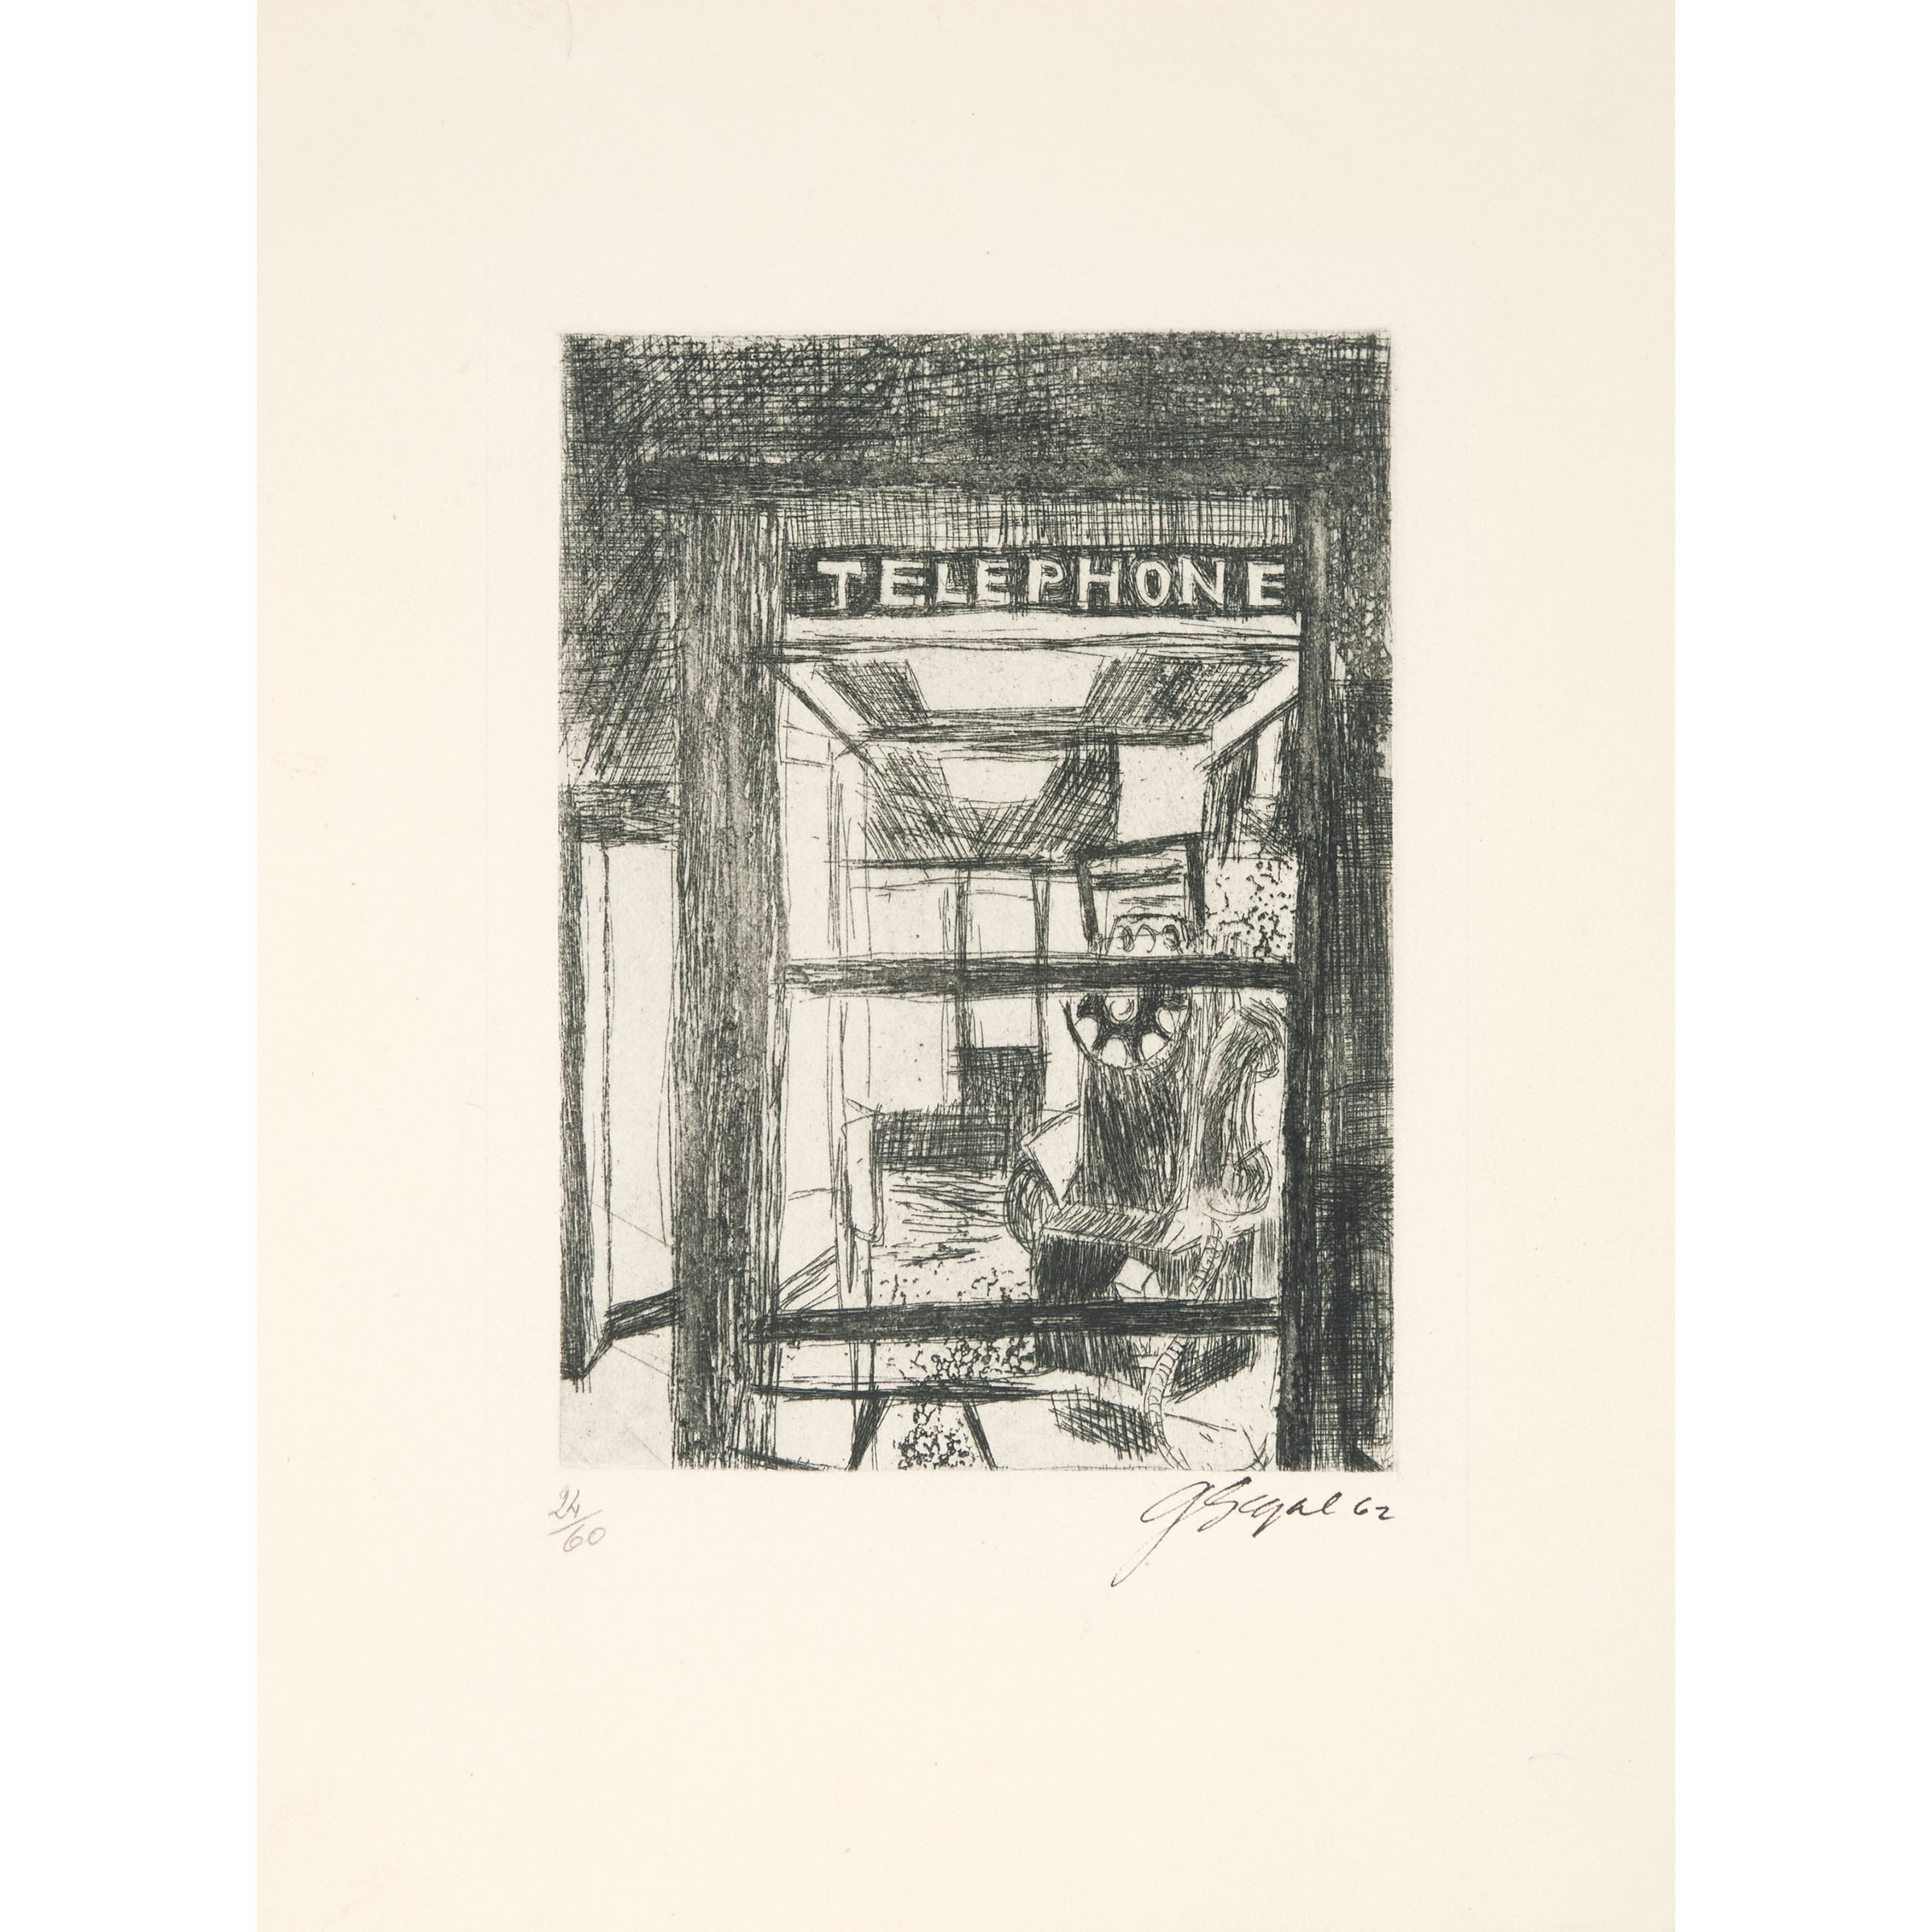 TELEPHONE BOOTH, PLATE 15 FROM "THE INTERNATIONAL AVANT-GARDE, VOL. V; AMERICA DISCOVERED," 1962 - George Segal